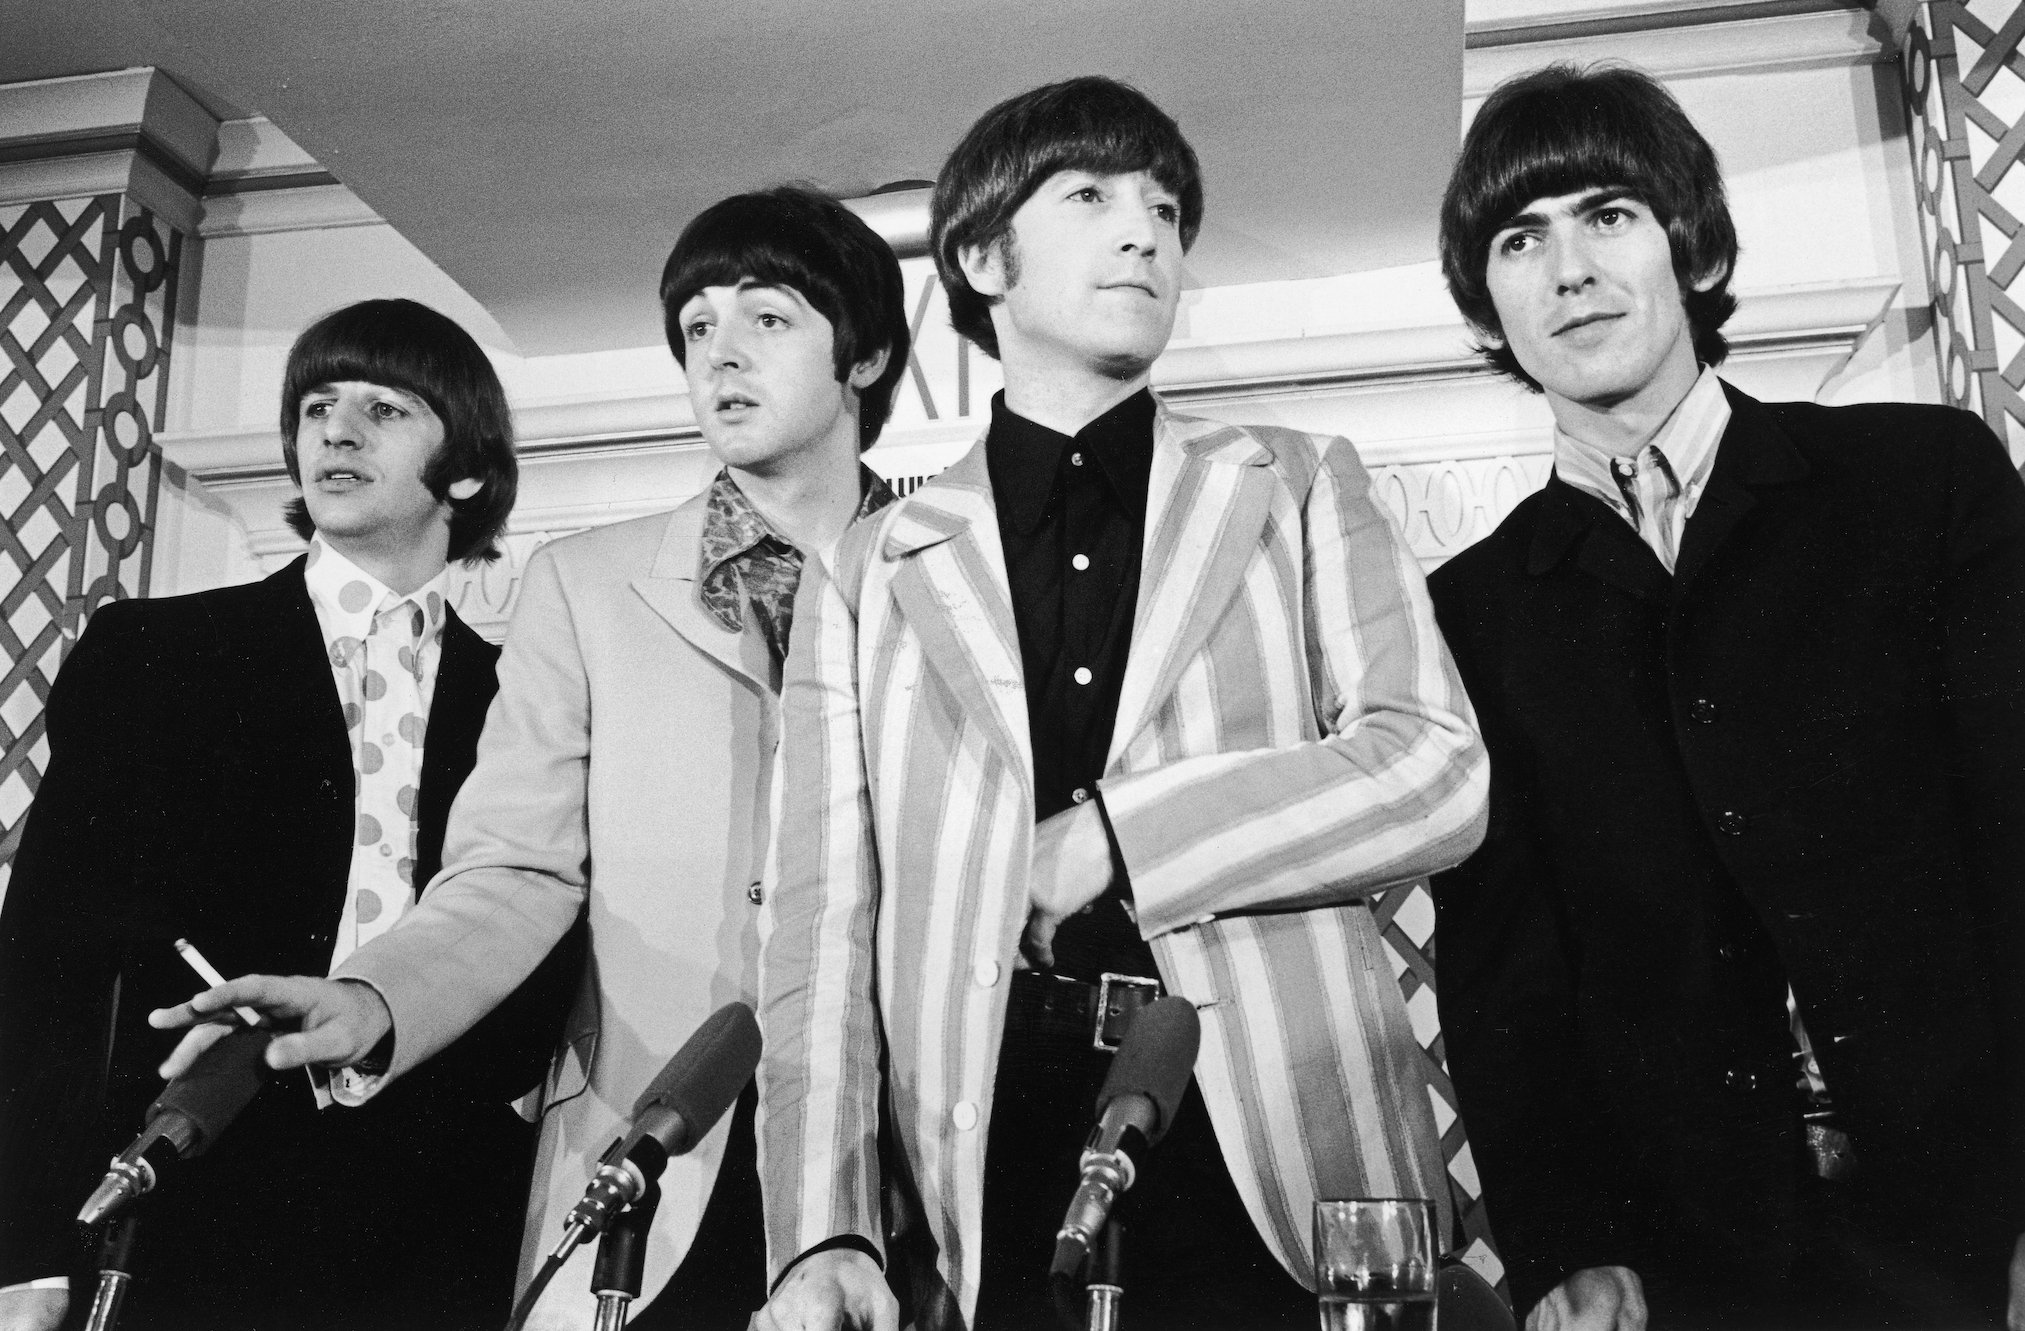 The Beatles at a press conference for their performance at Shea Stadium in New York City